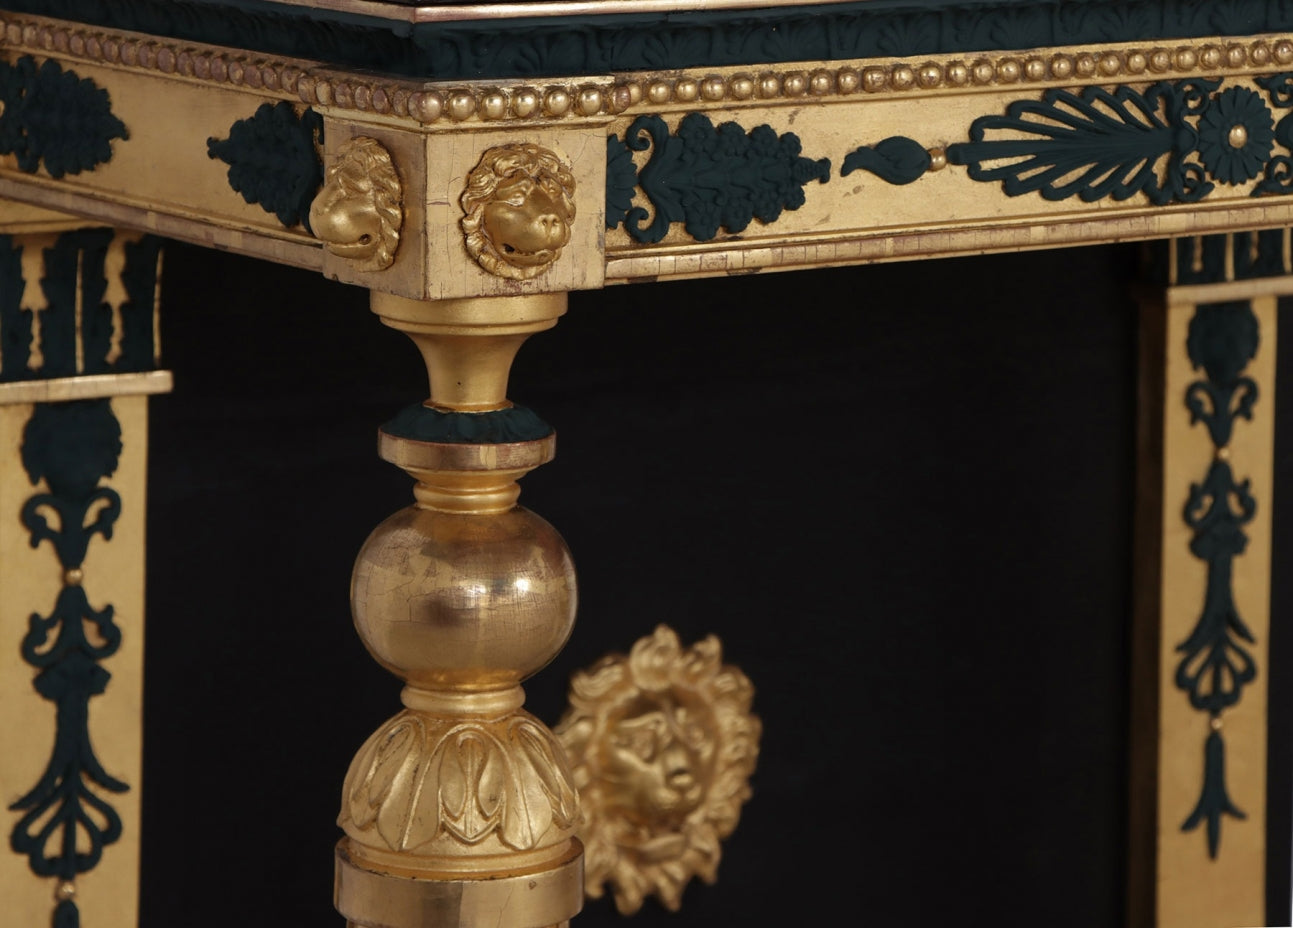 Antique water gilded console and mirror